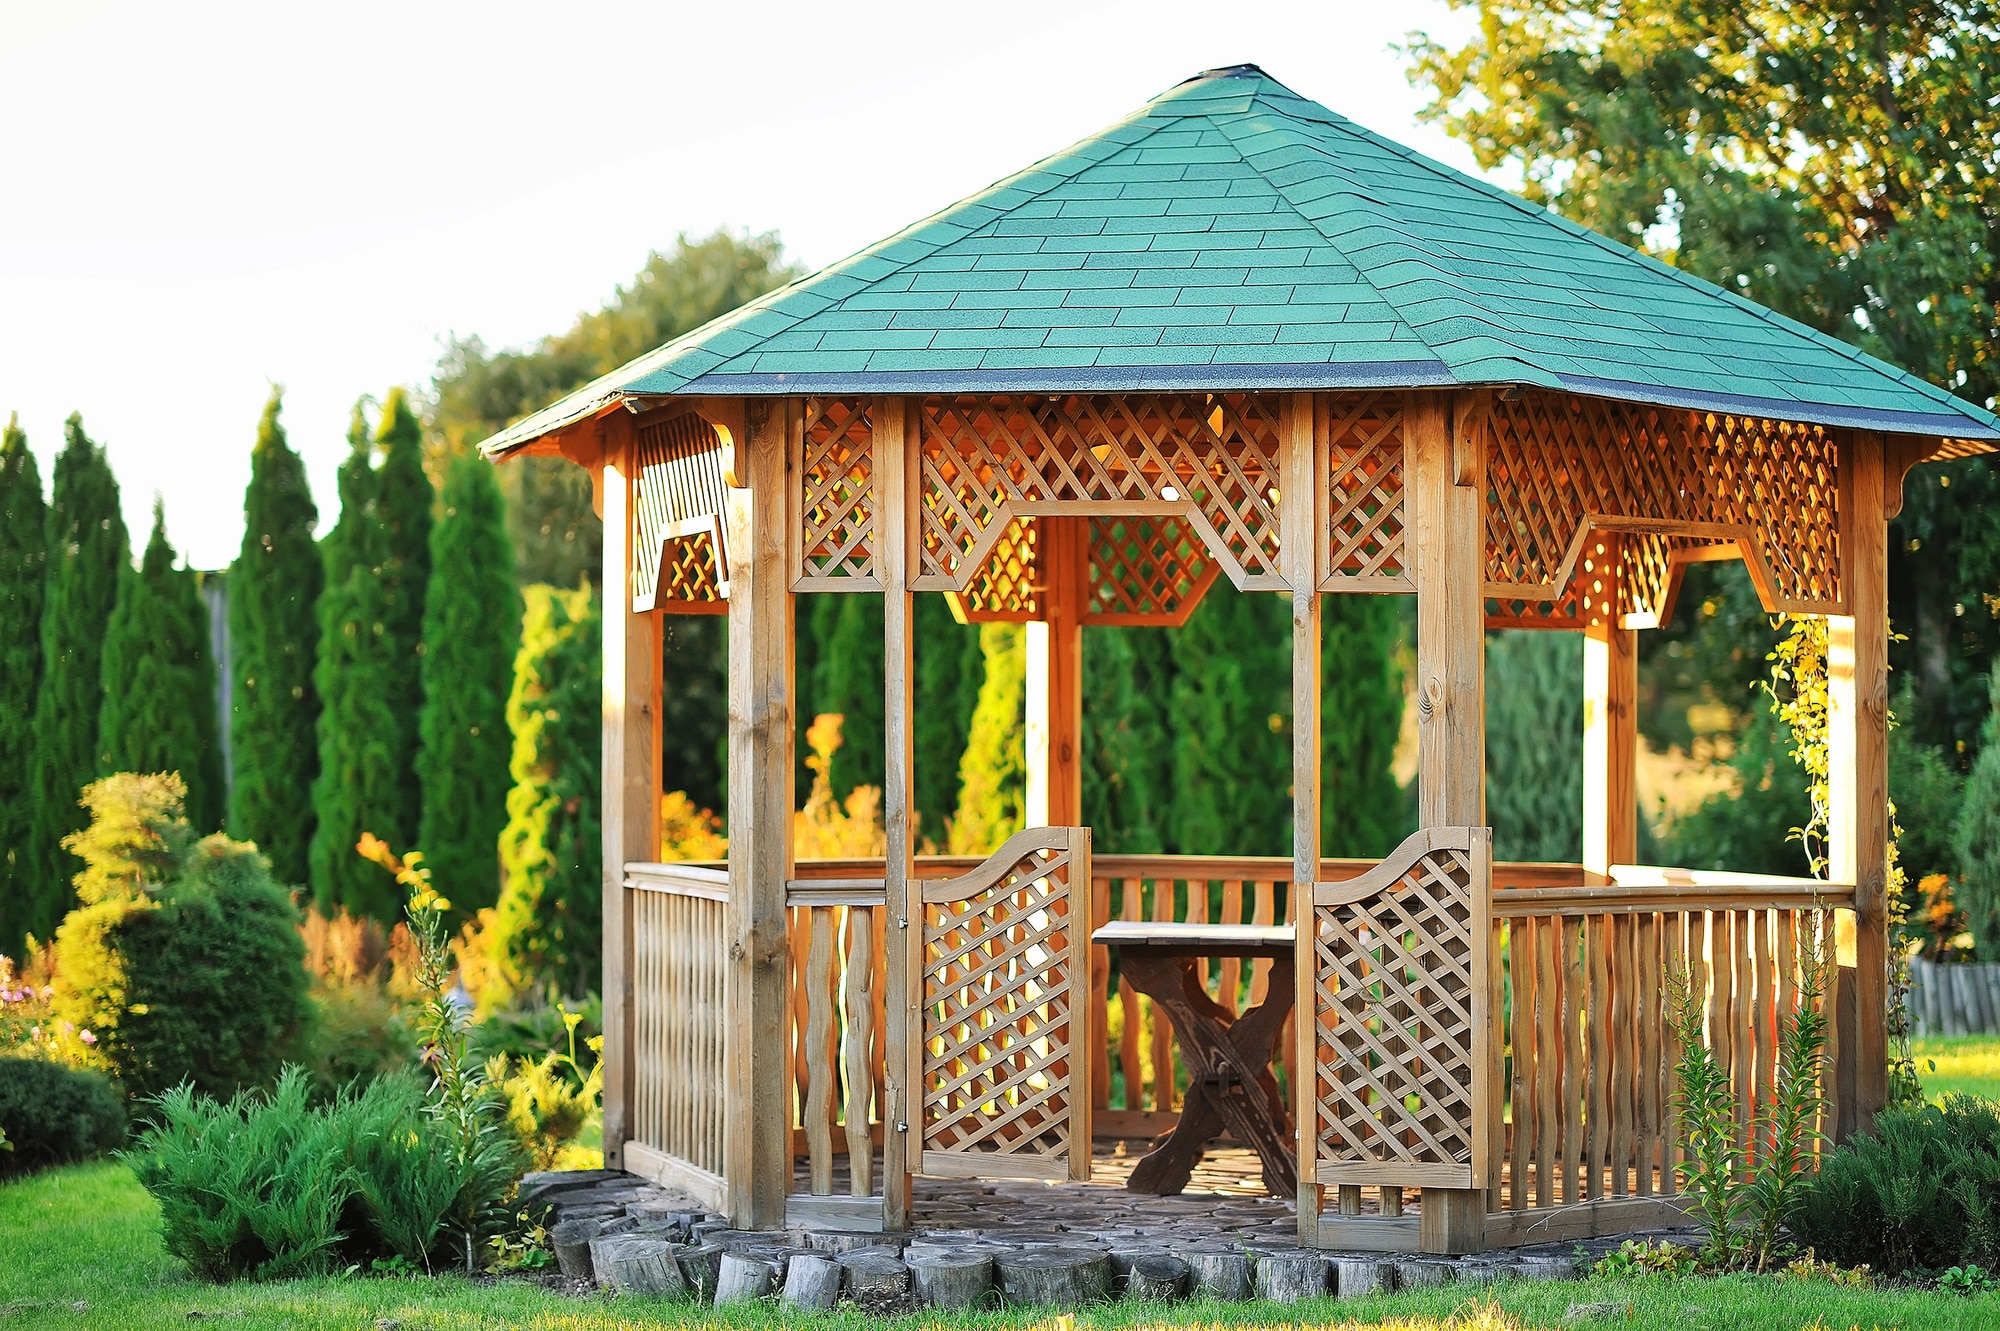 Weathering the Storm: Is it Safe to Shelter in a Gazebo?